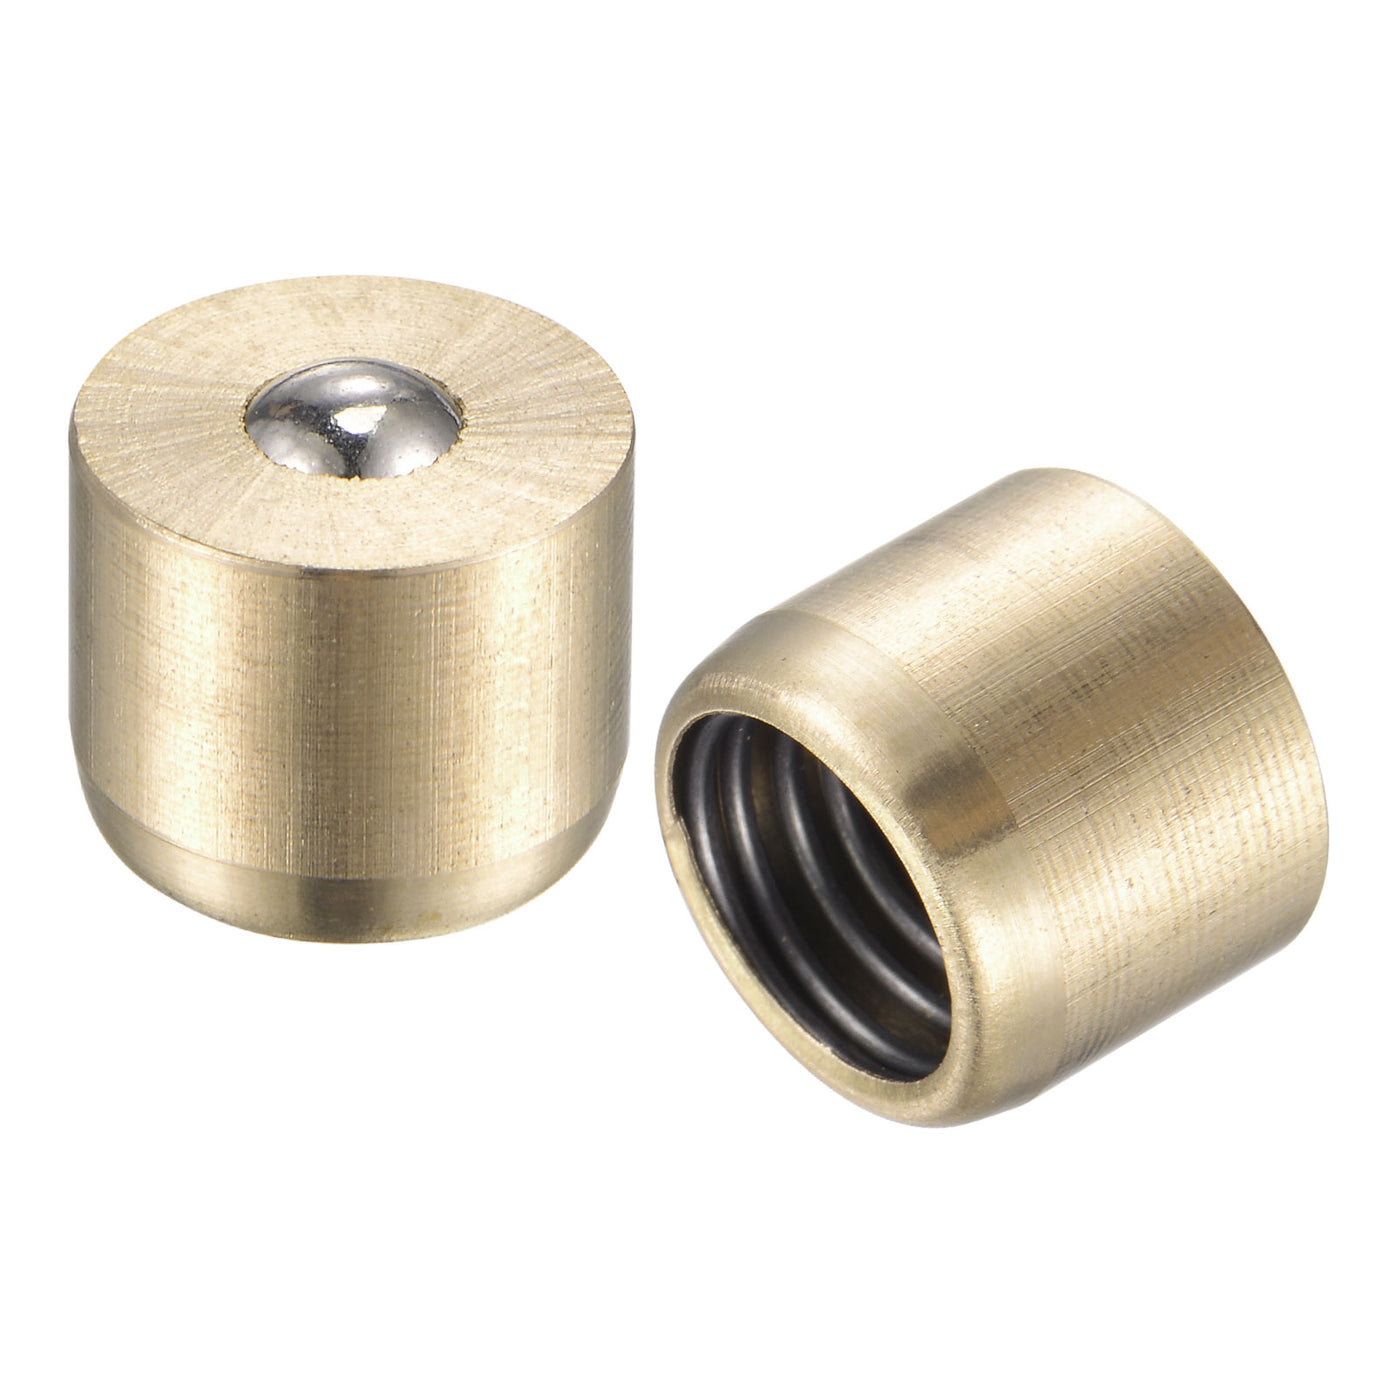 Uxcell Uxcell Brass Push Button Grease Oil Cup 8x8mm Ball Oiler for Lubrication System 20Pcs